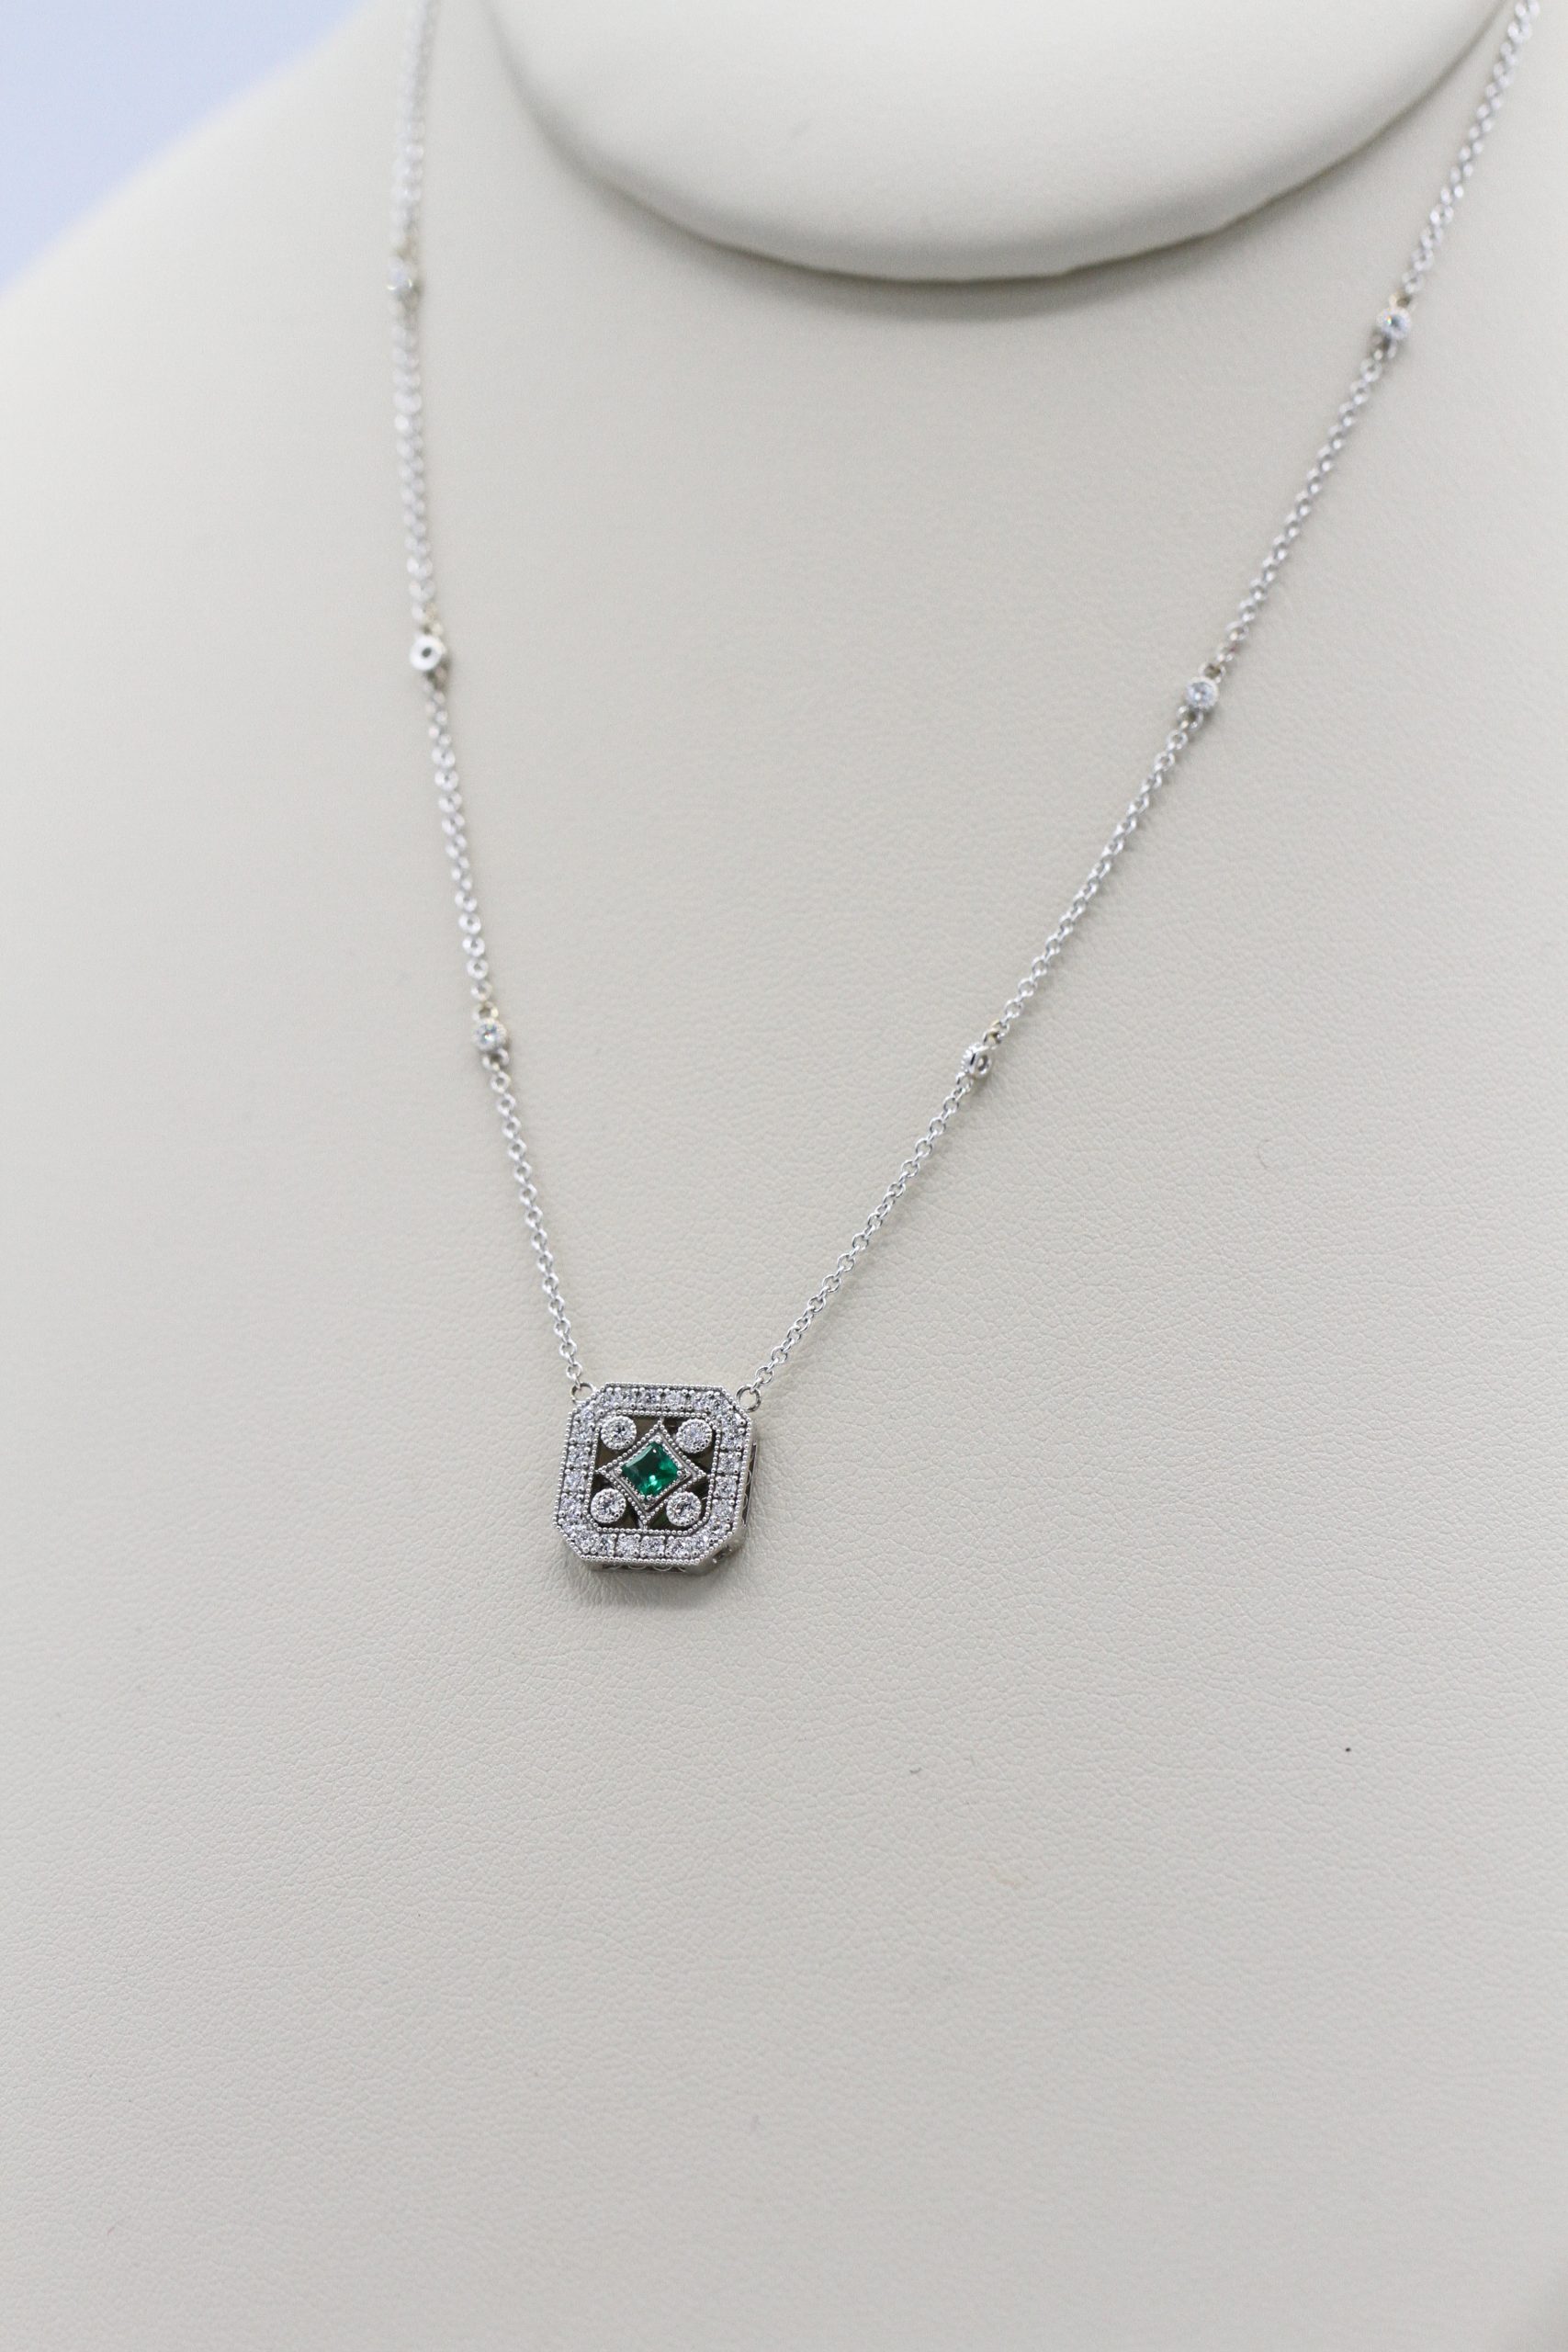 A silver necklace with an emerald centerpiece